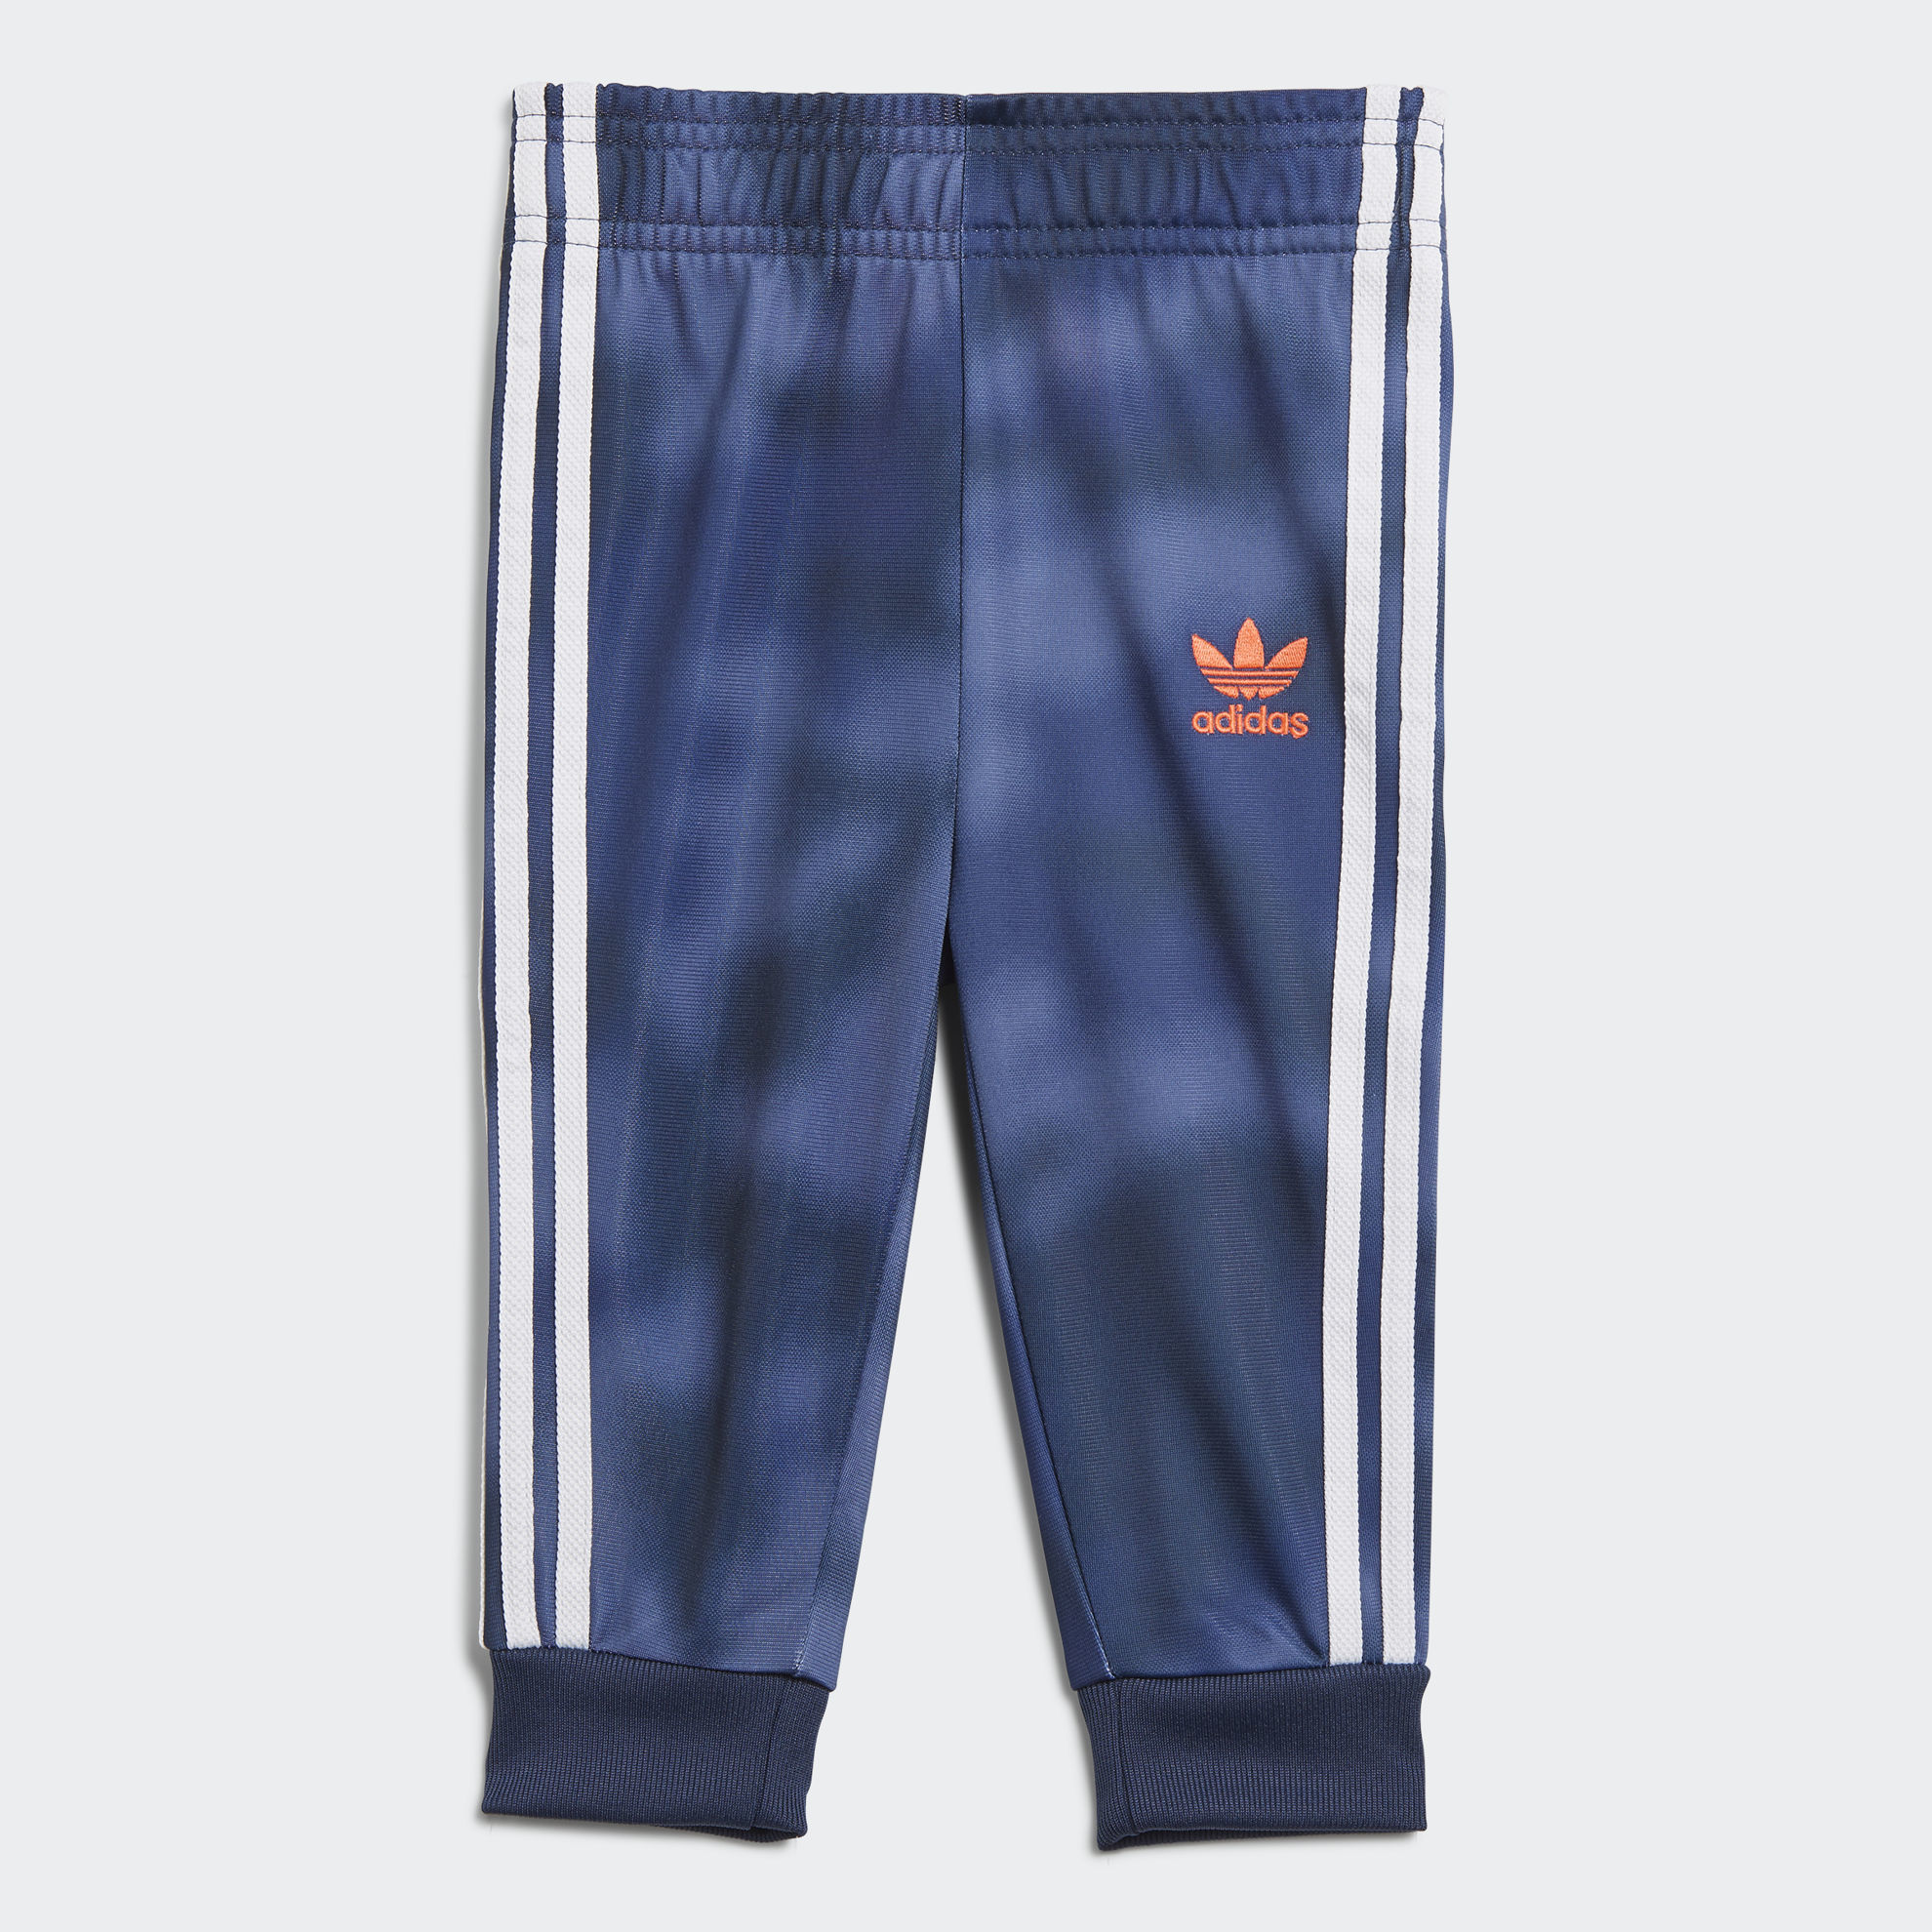 adidas Allover Print Camo SST Track Suit | adidas Egypt Official Website